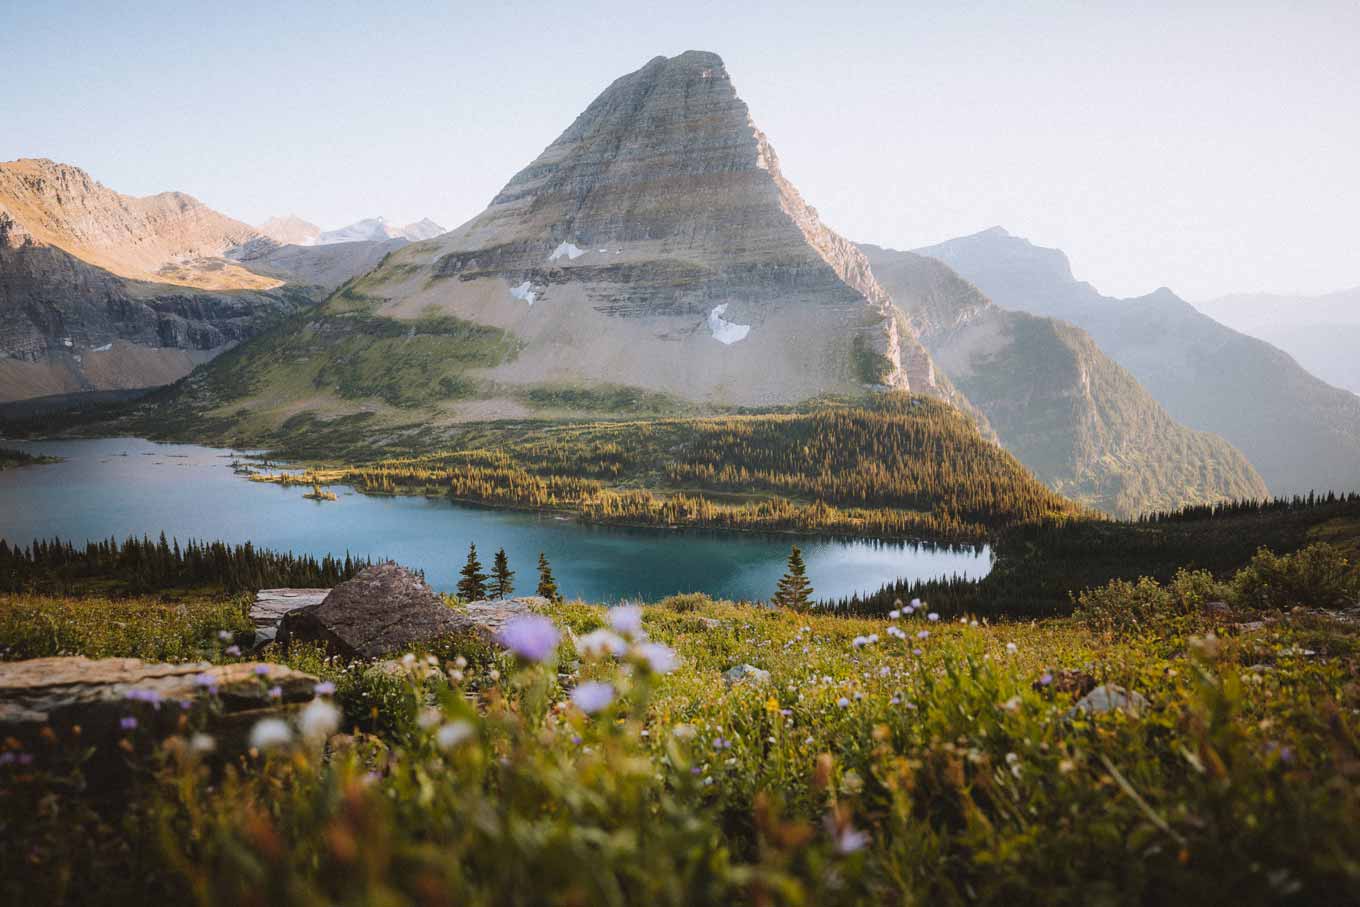 Landscape view of Glacier National Park, with flowers budding in the foreground